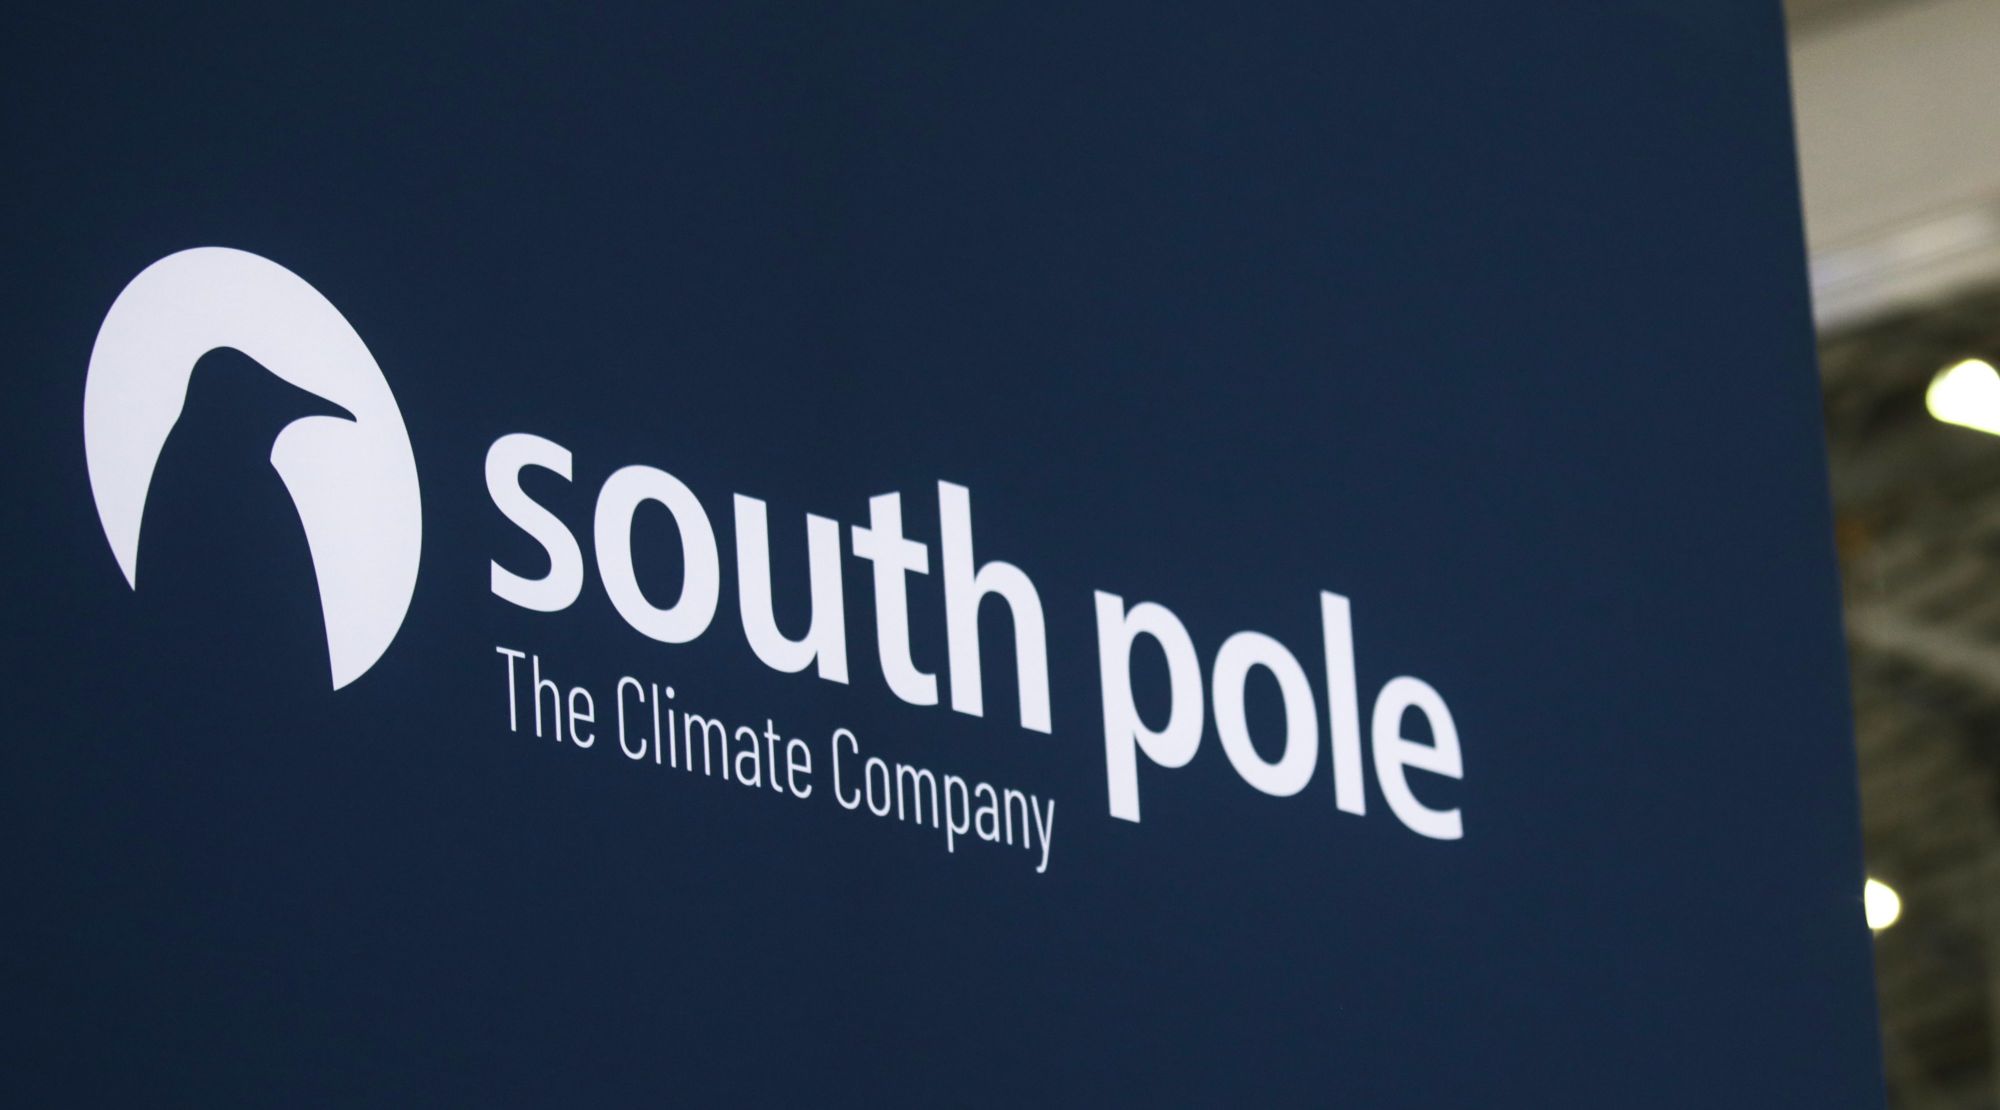 South Pole raises undisclosed amount from ‘largest shareholders’ including Temasek’s GenZero